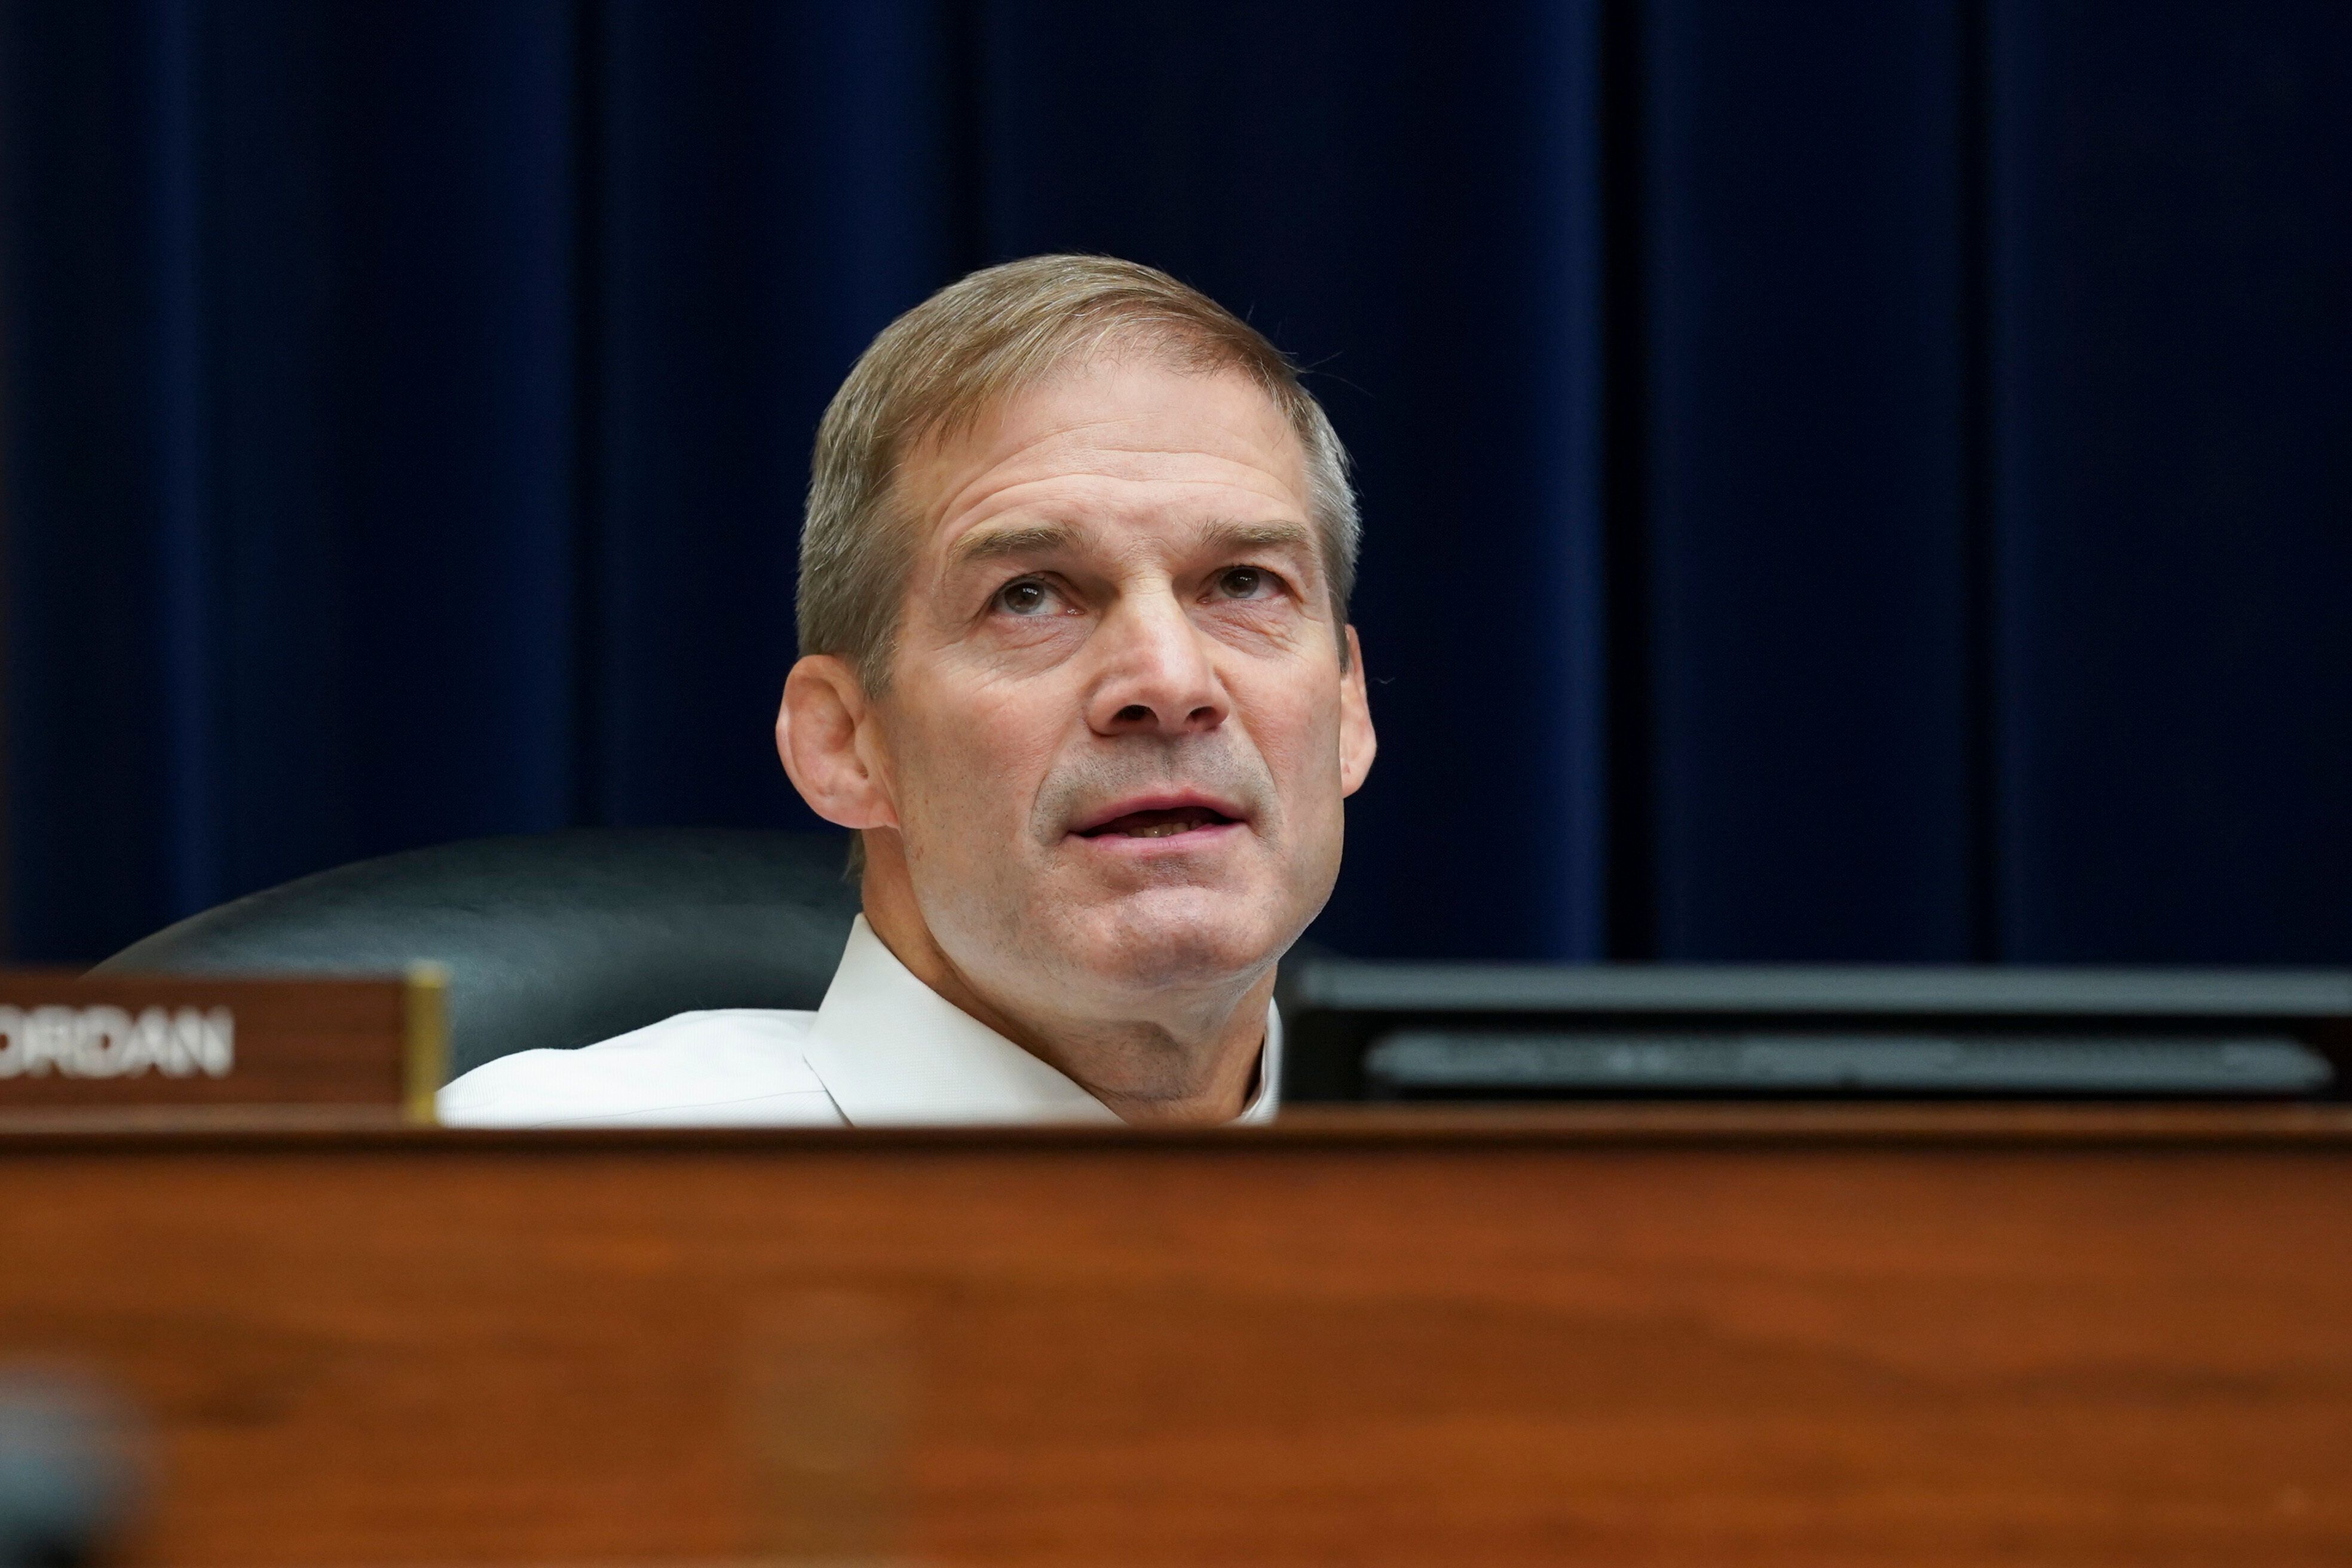 People Think Jim Jordan’s Weird Tweet About Fauci And Christmas Is A Spoof. It’s Not.